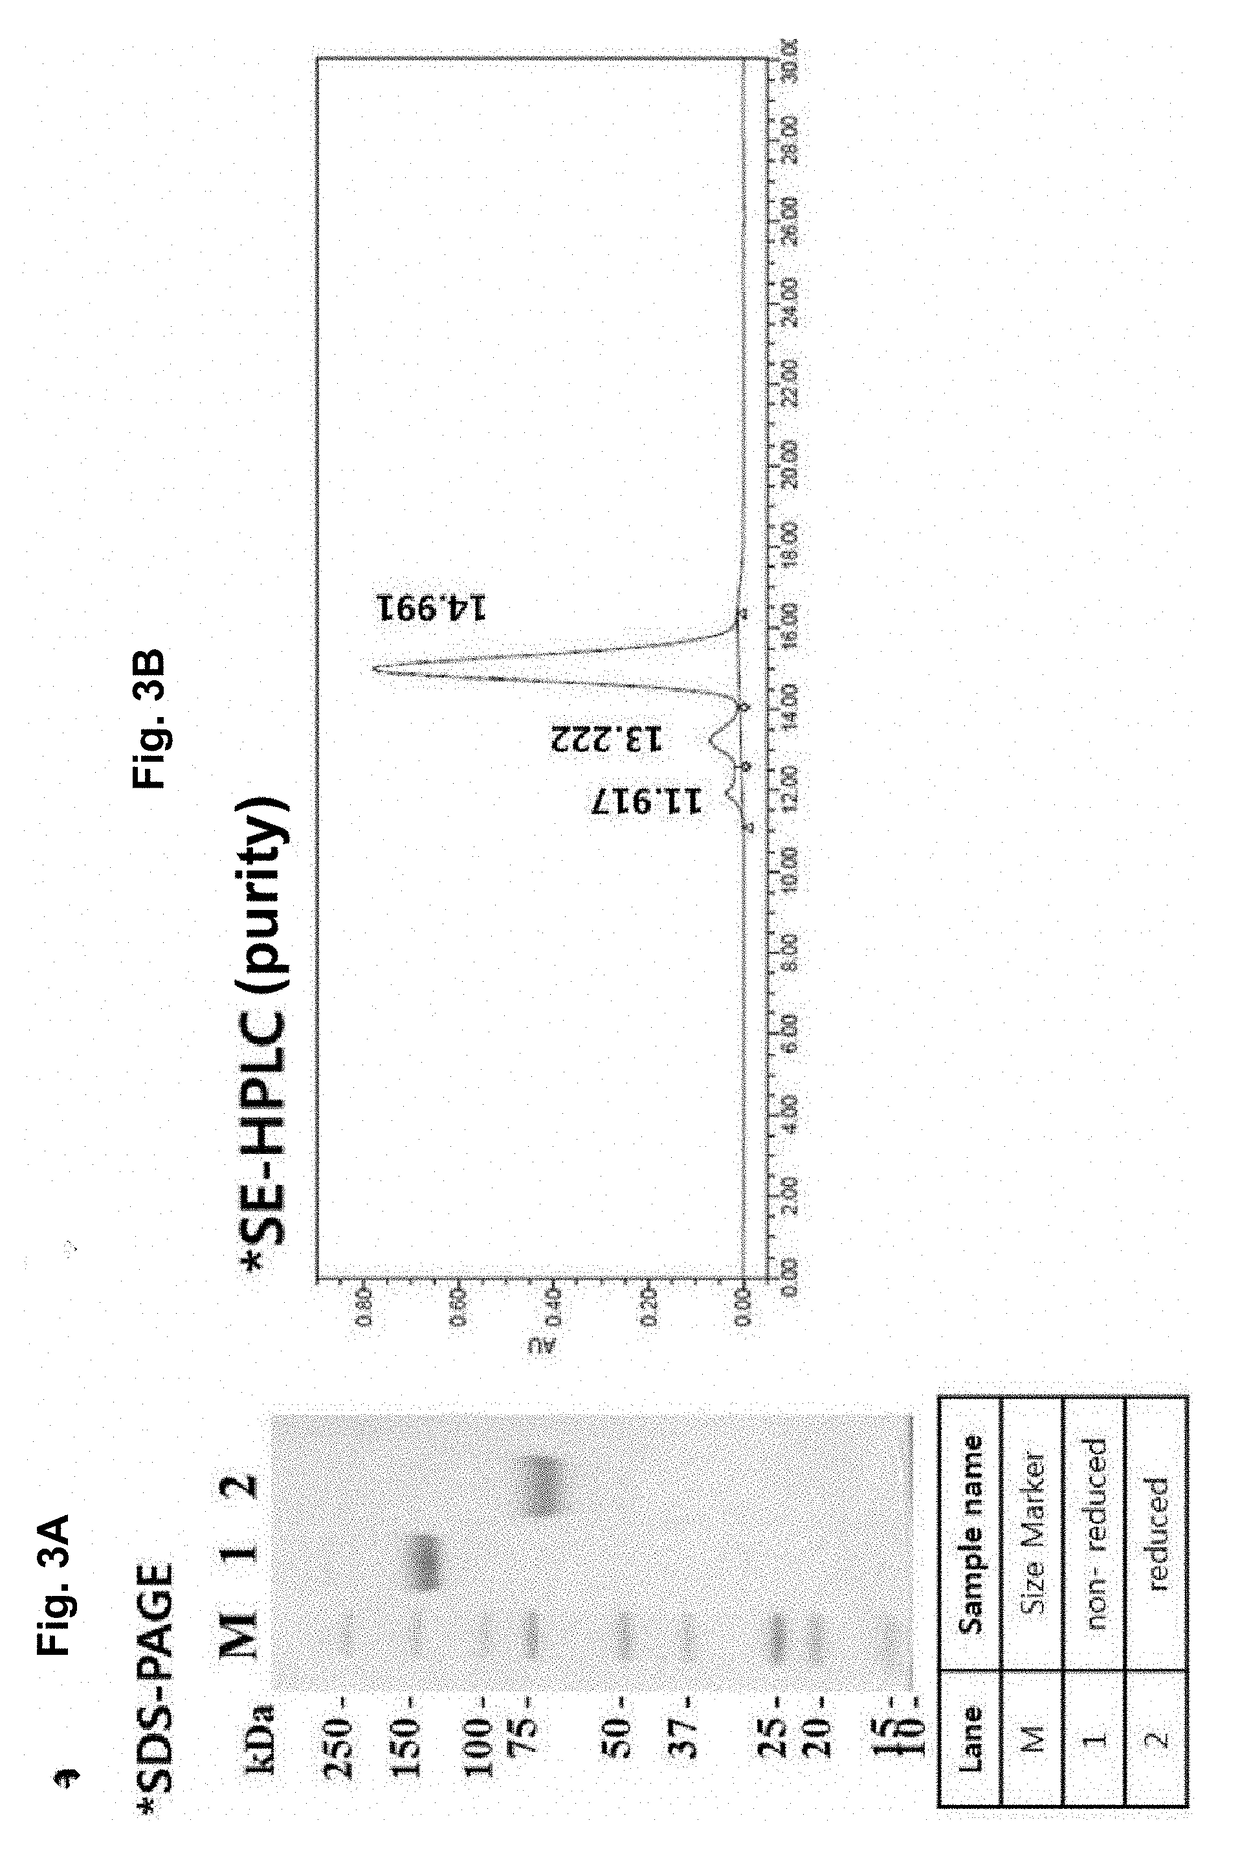 Pd-l1 fusion protein and use thereof